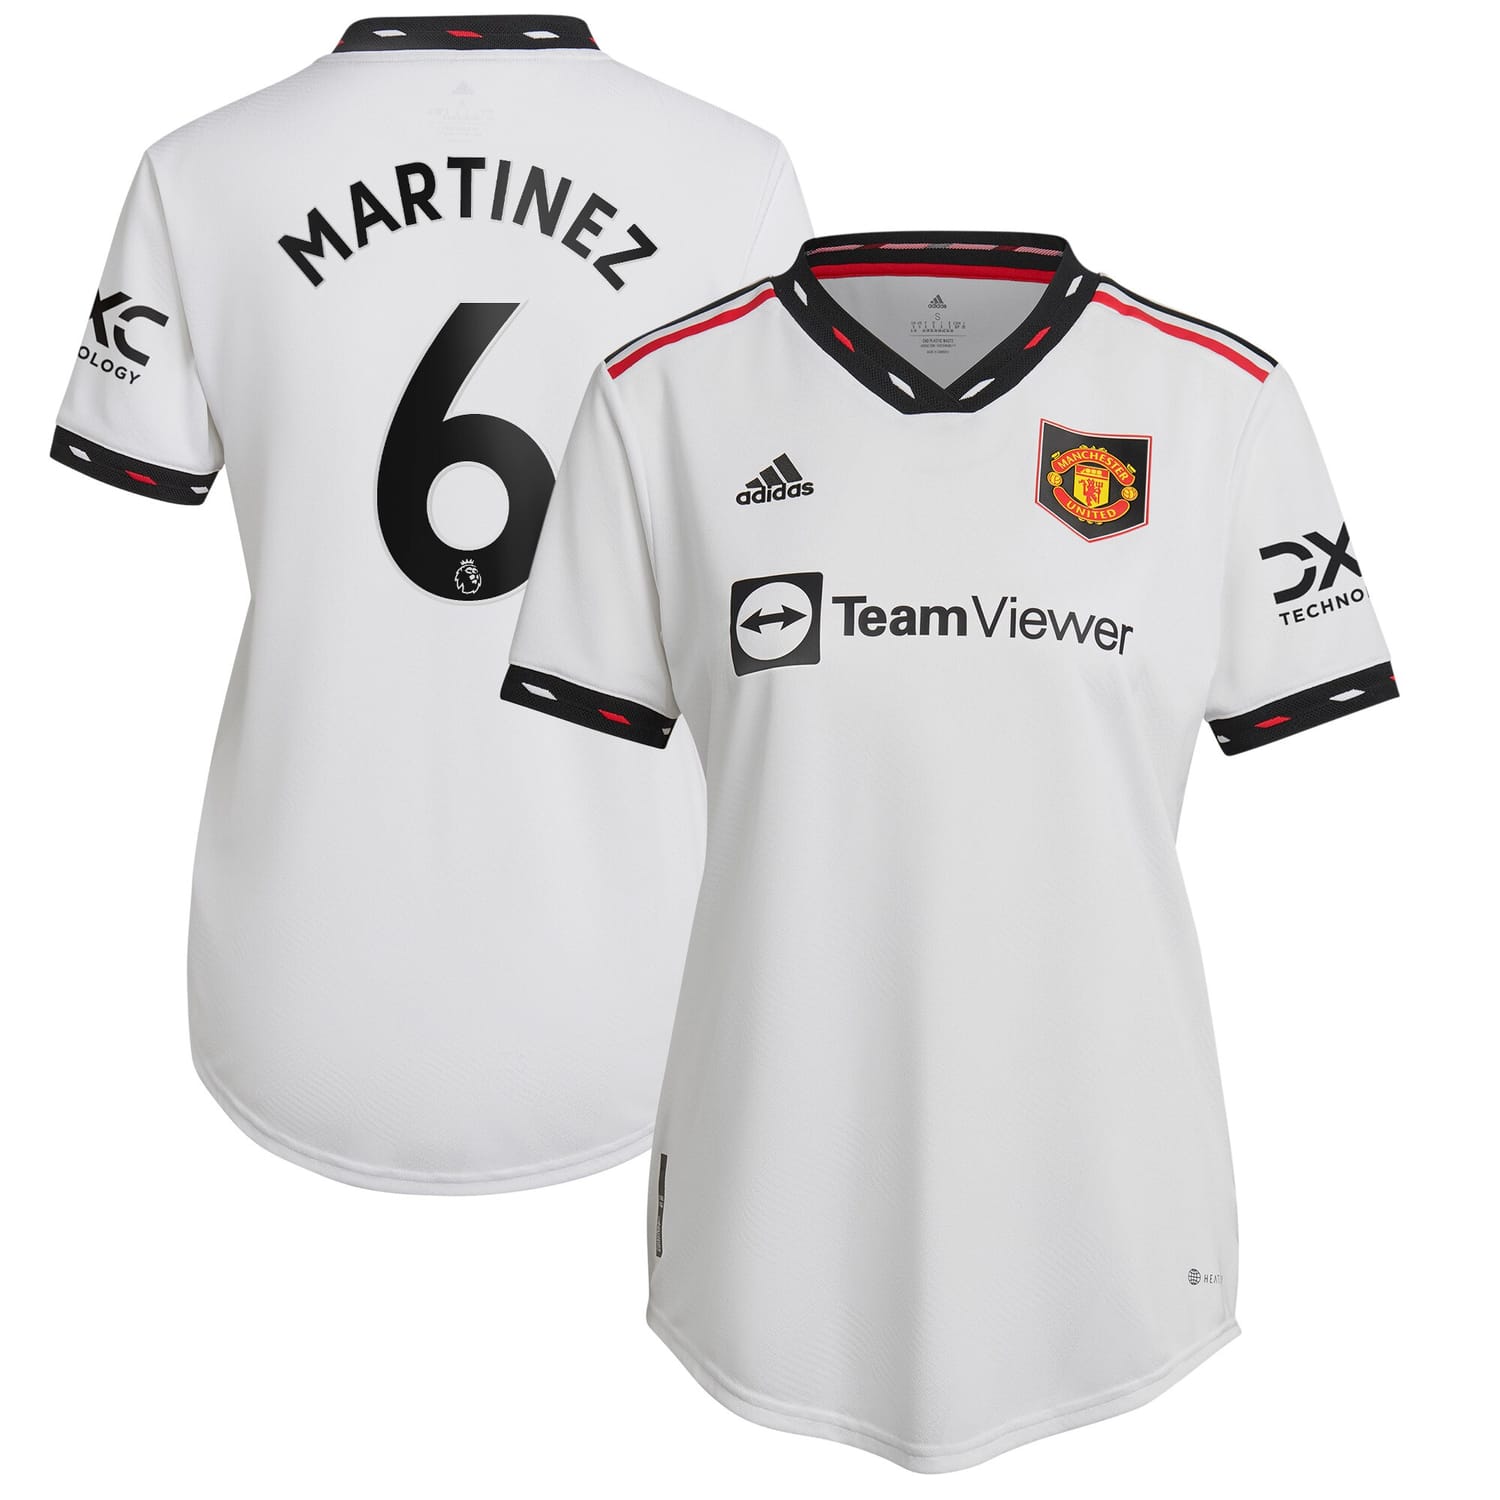 Premier League Manchester United Away Authentic Jersey Shirt 2022-23 player Lisandro Martínez 6 printing for Women